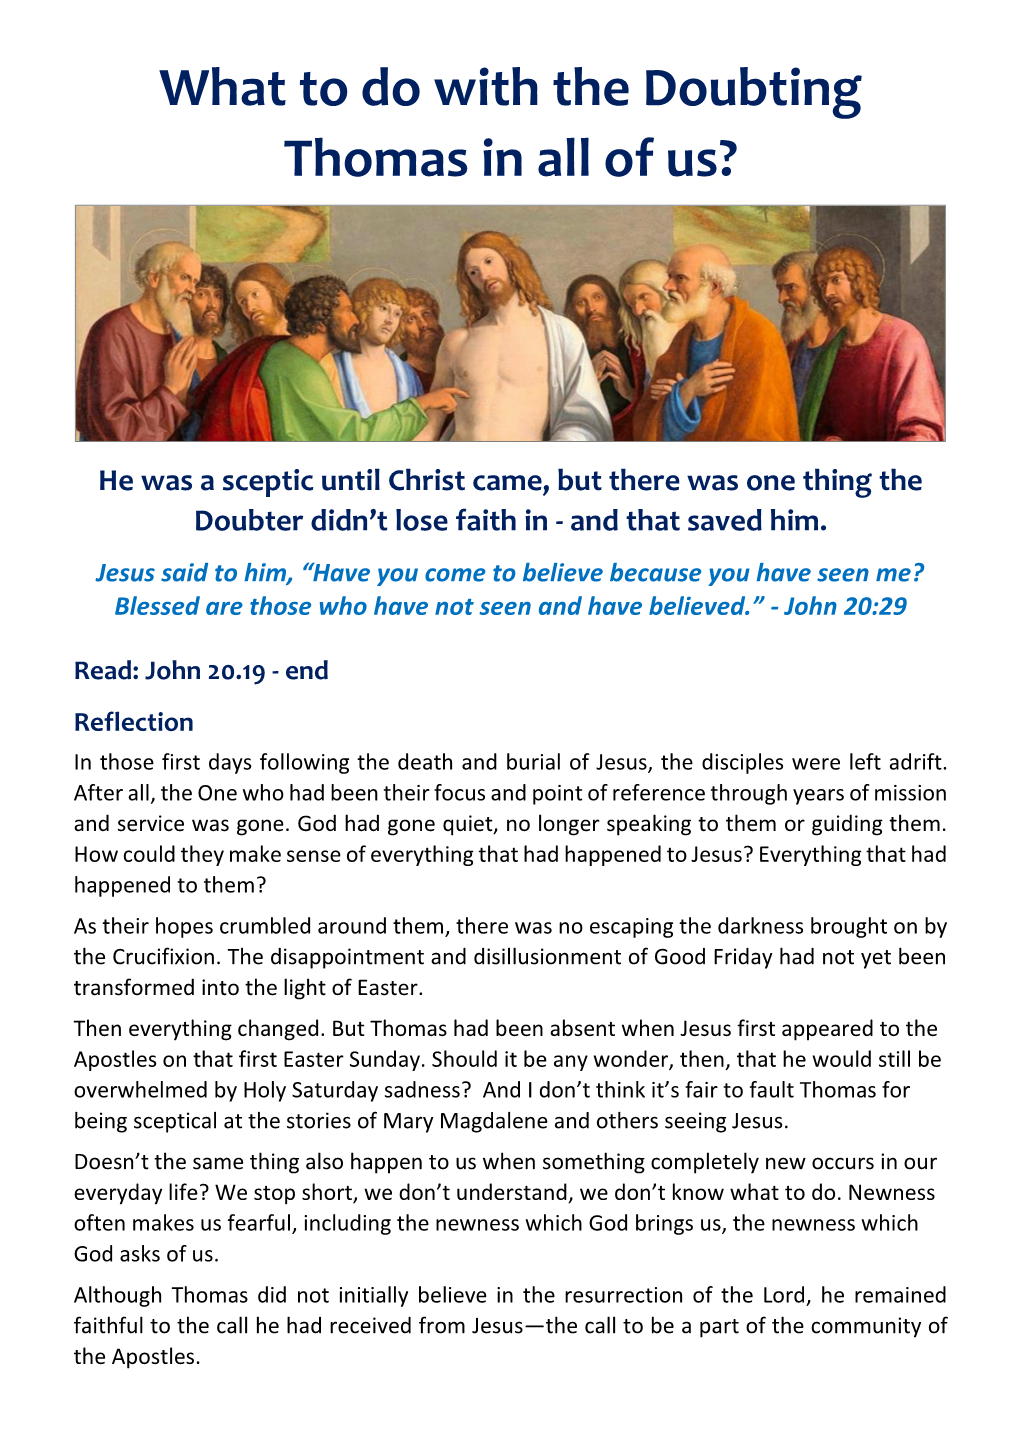 What to Do with the Doubting Thomas in All of Us?